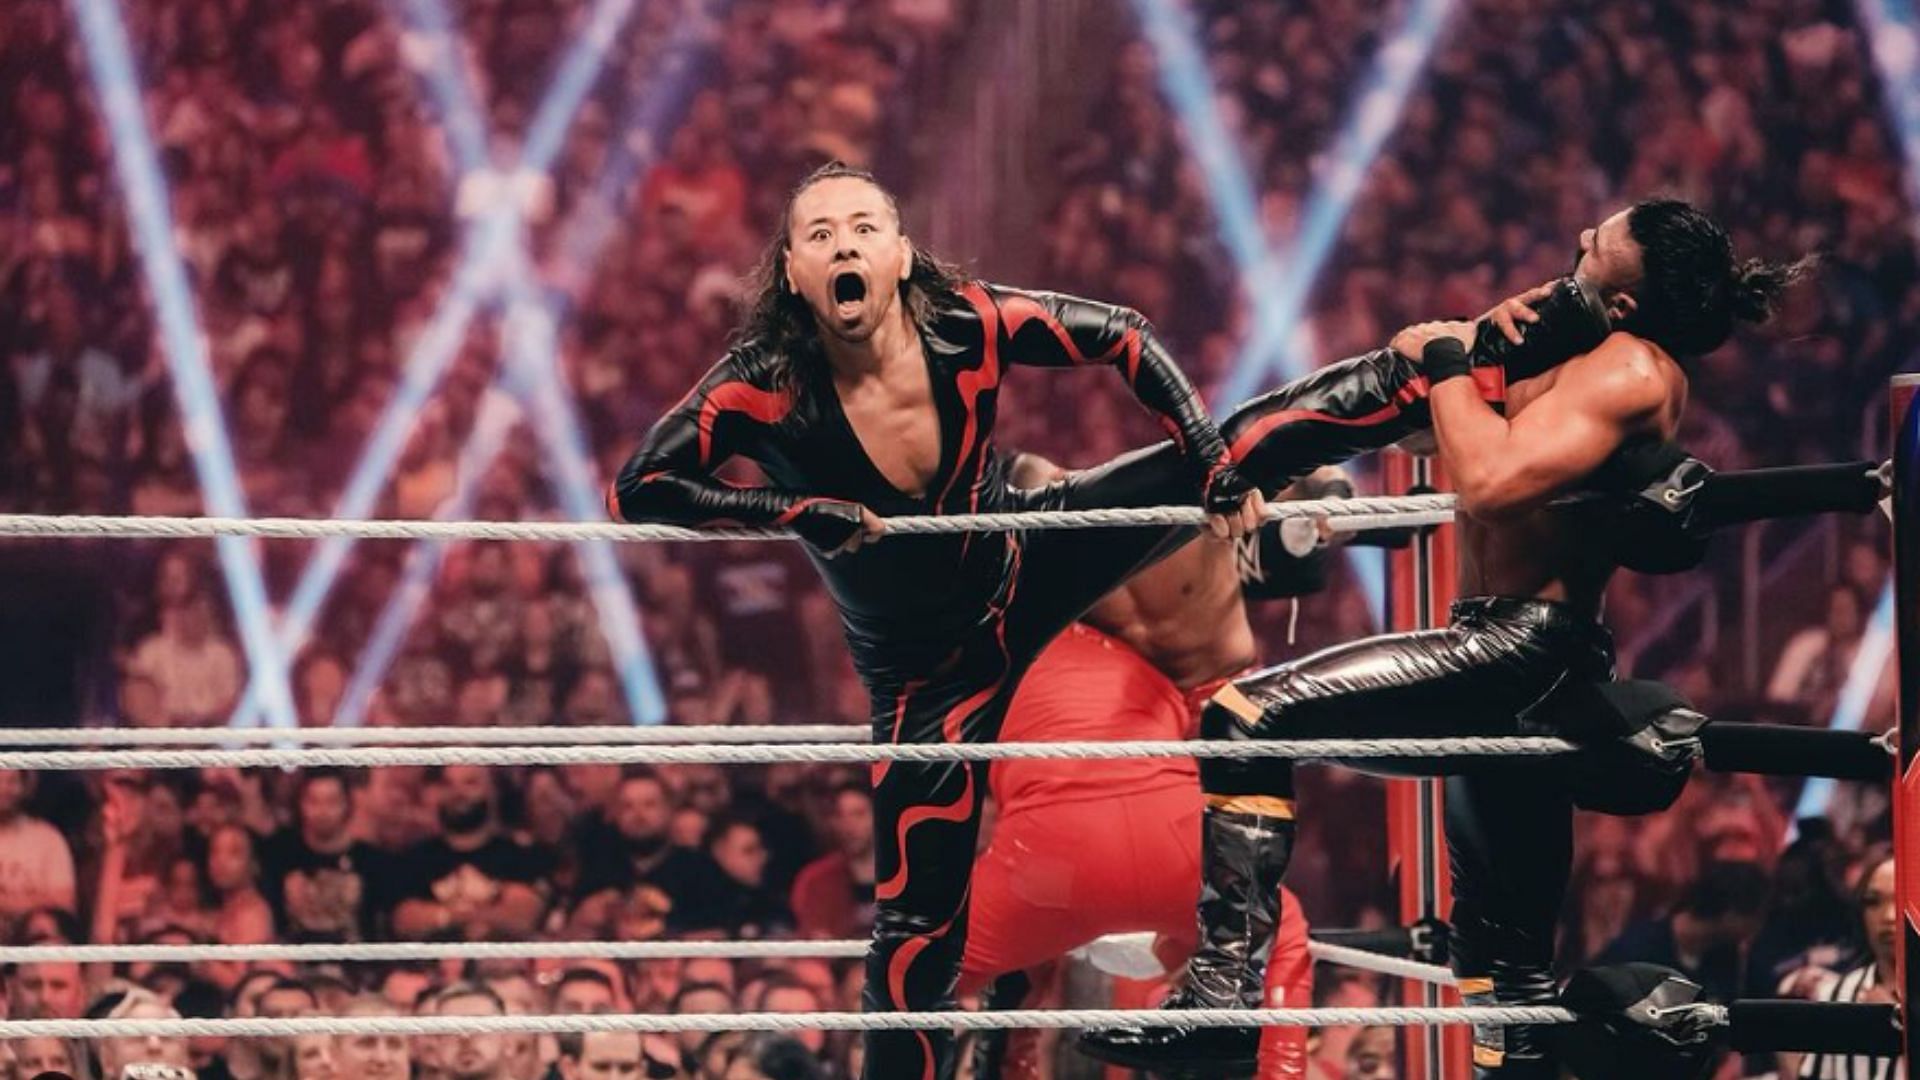 Shinsuke Nakamura took out Roman Reigns to win the Royal Rumble in 2018